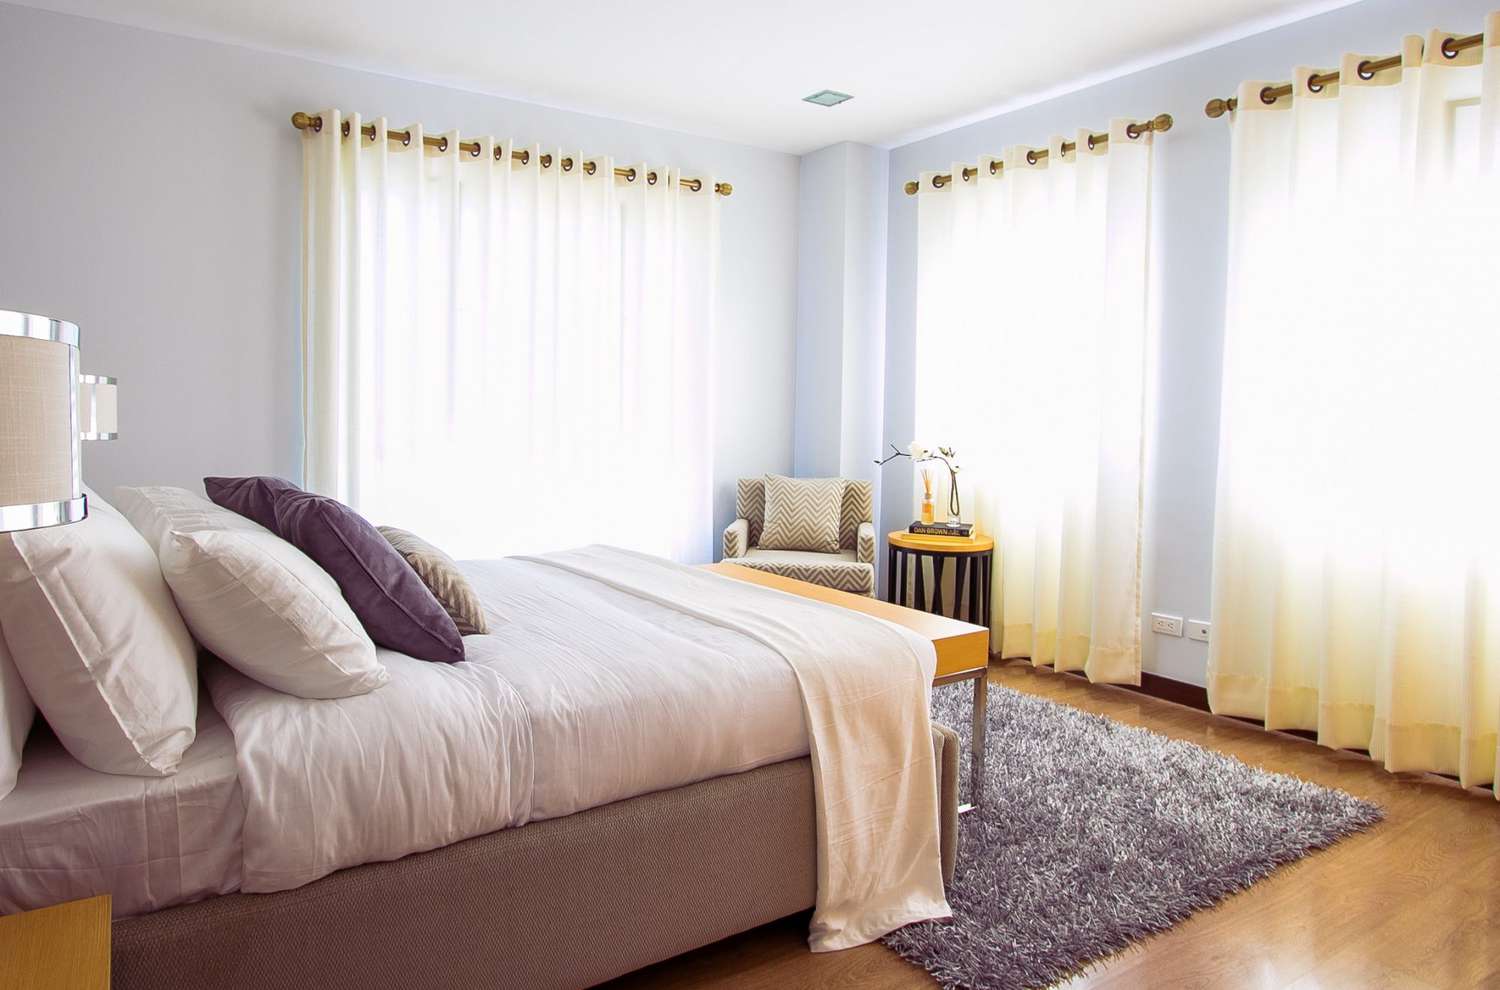 Guide To Curtains And Window Treatments Real Simple,How To Paint Fake Wood Paneling